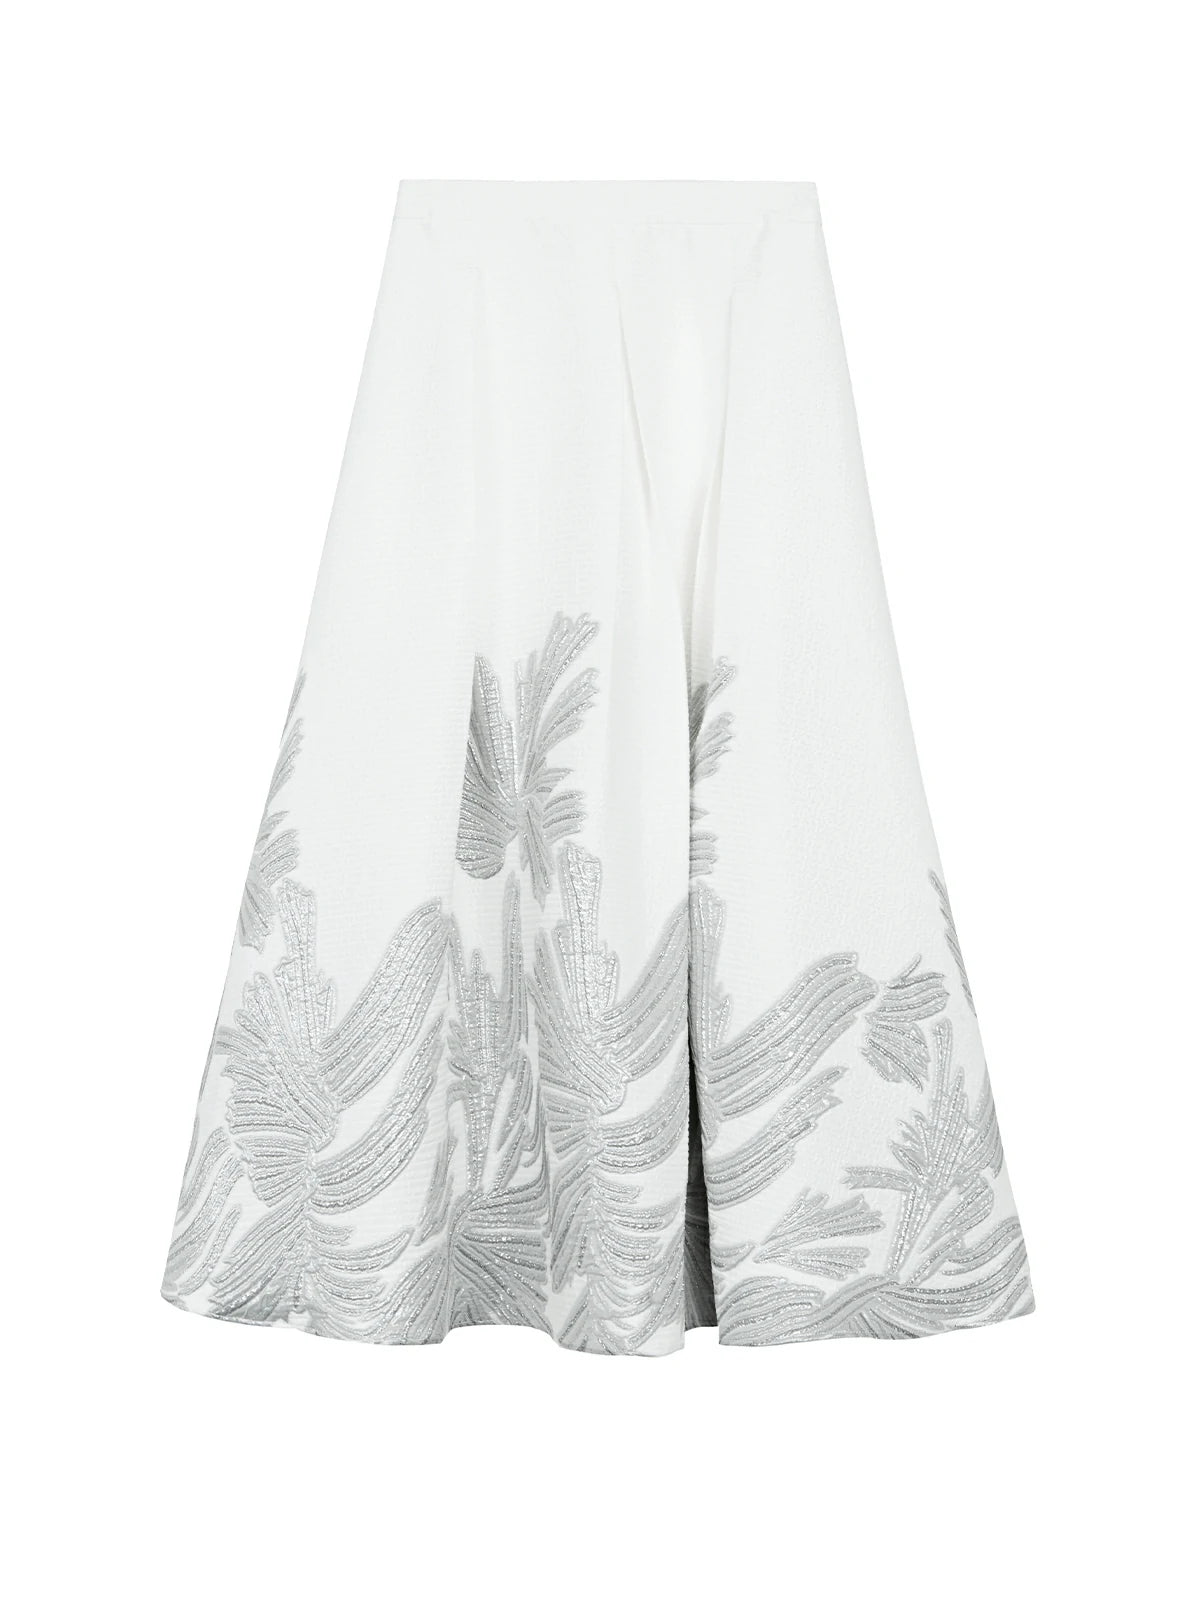 Distinctive Outfit Choice: White A-line Skirt for Trendsetting Style